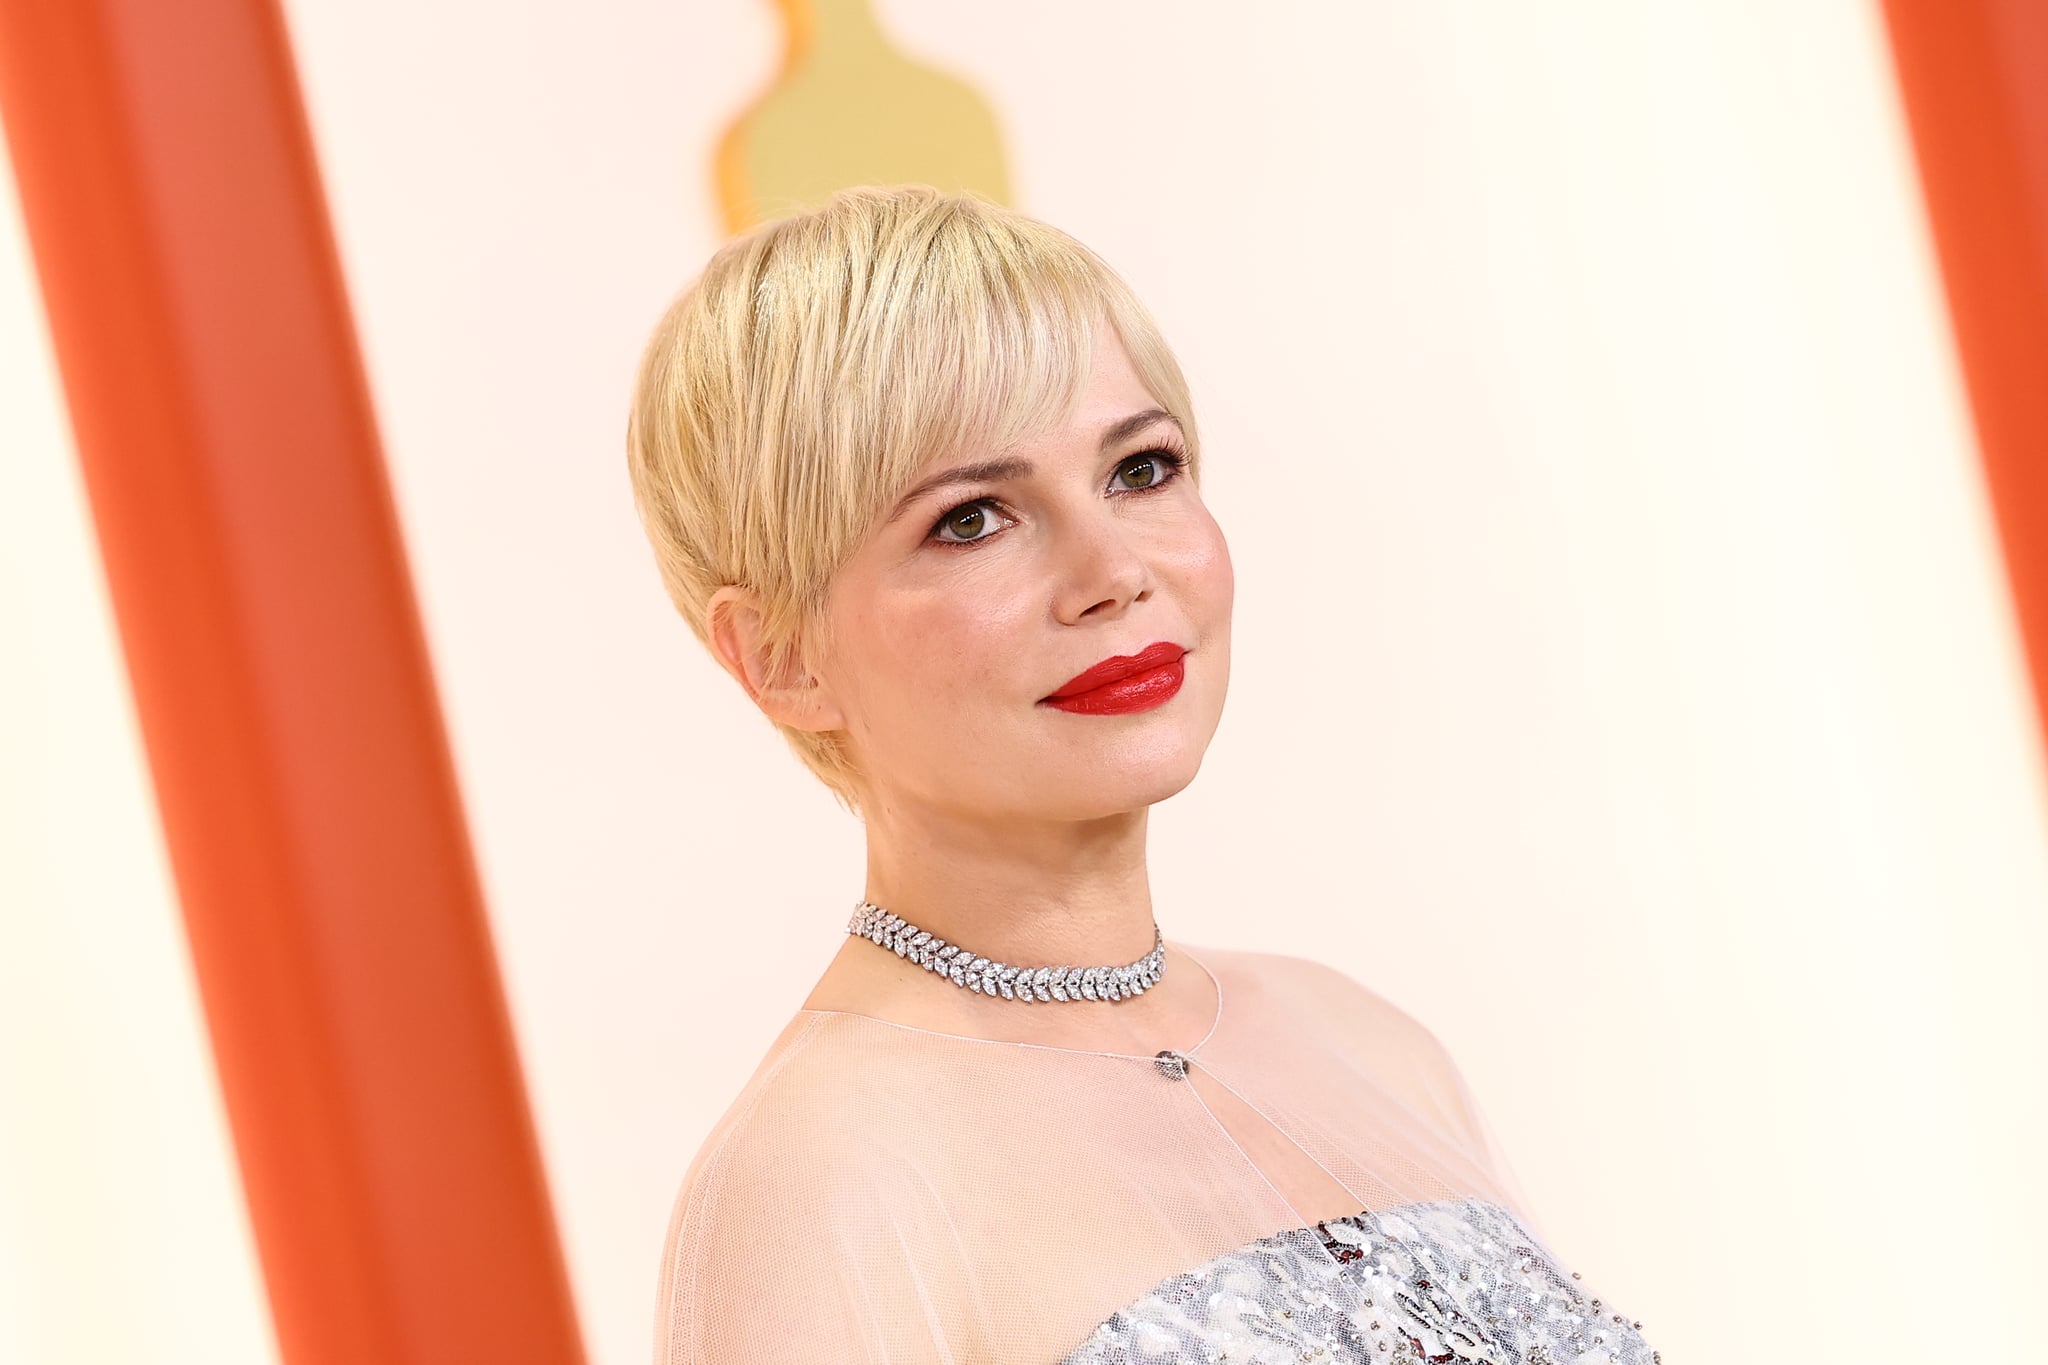 HOLLYWOOD, CALIFORNIA - MARCH 12: Michelle Williams attends the 95th Annual Academy Awards on March 12, 2023 in Hollywood, California. (Photo by Arturo Holmes/Getty Images )